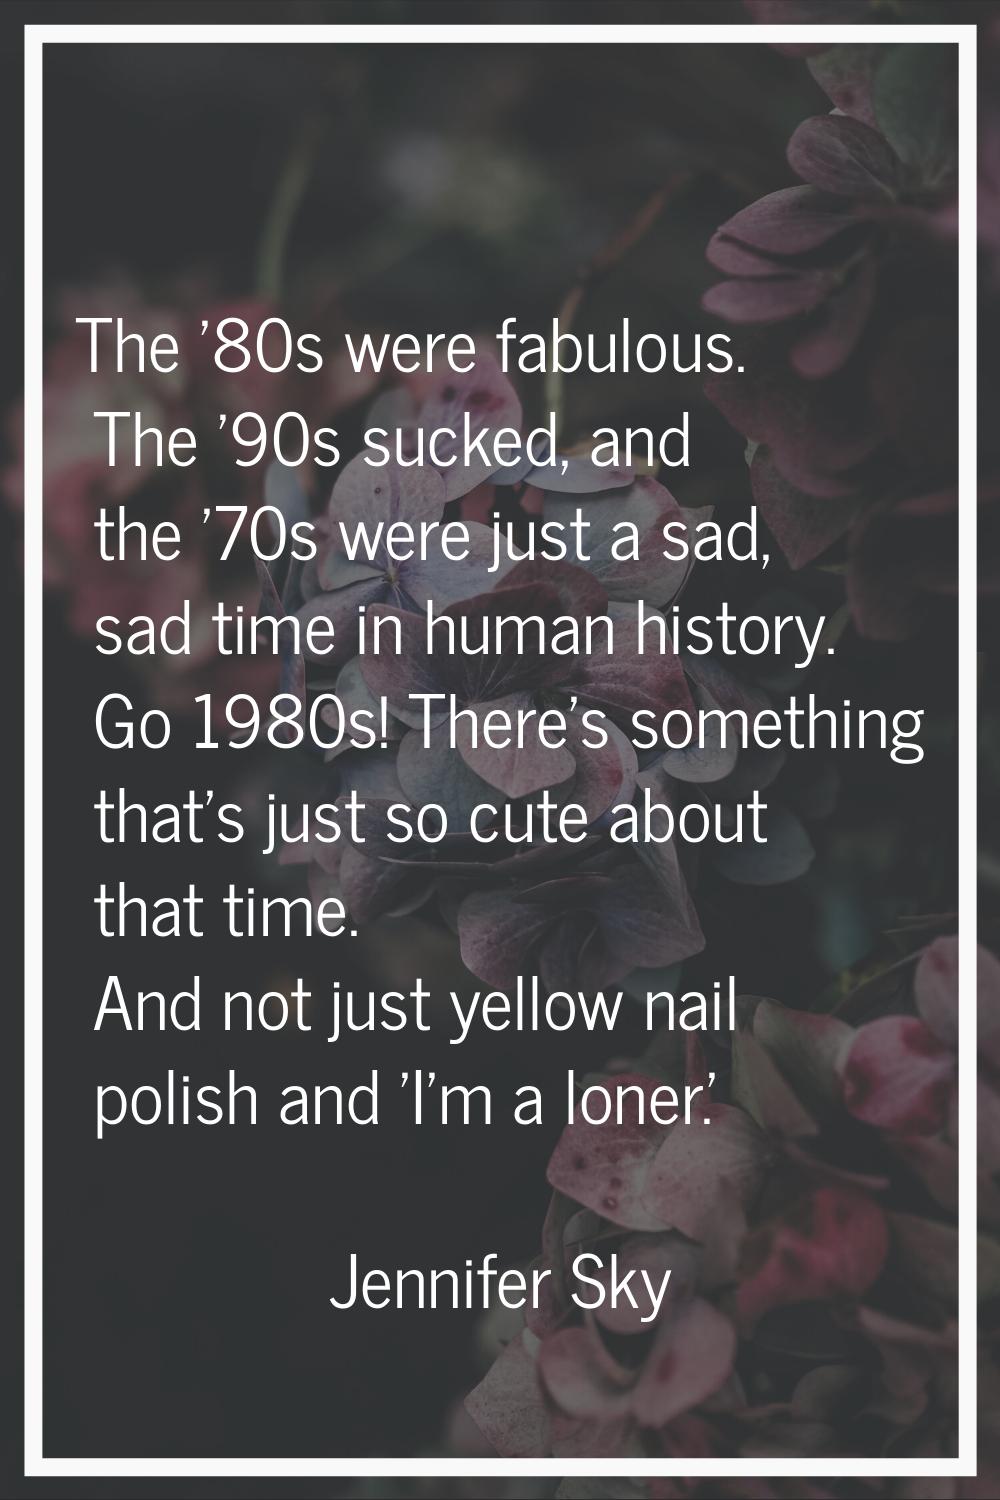 The '80s were fabulous. The '90s sucked, and the '70s were just a sad, sad time in human history. G